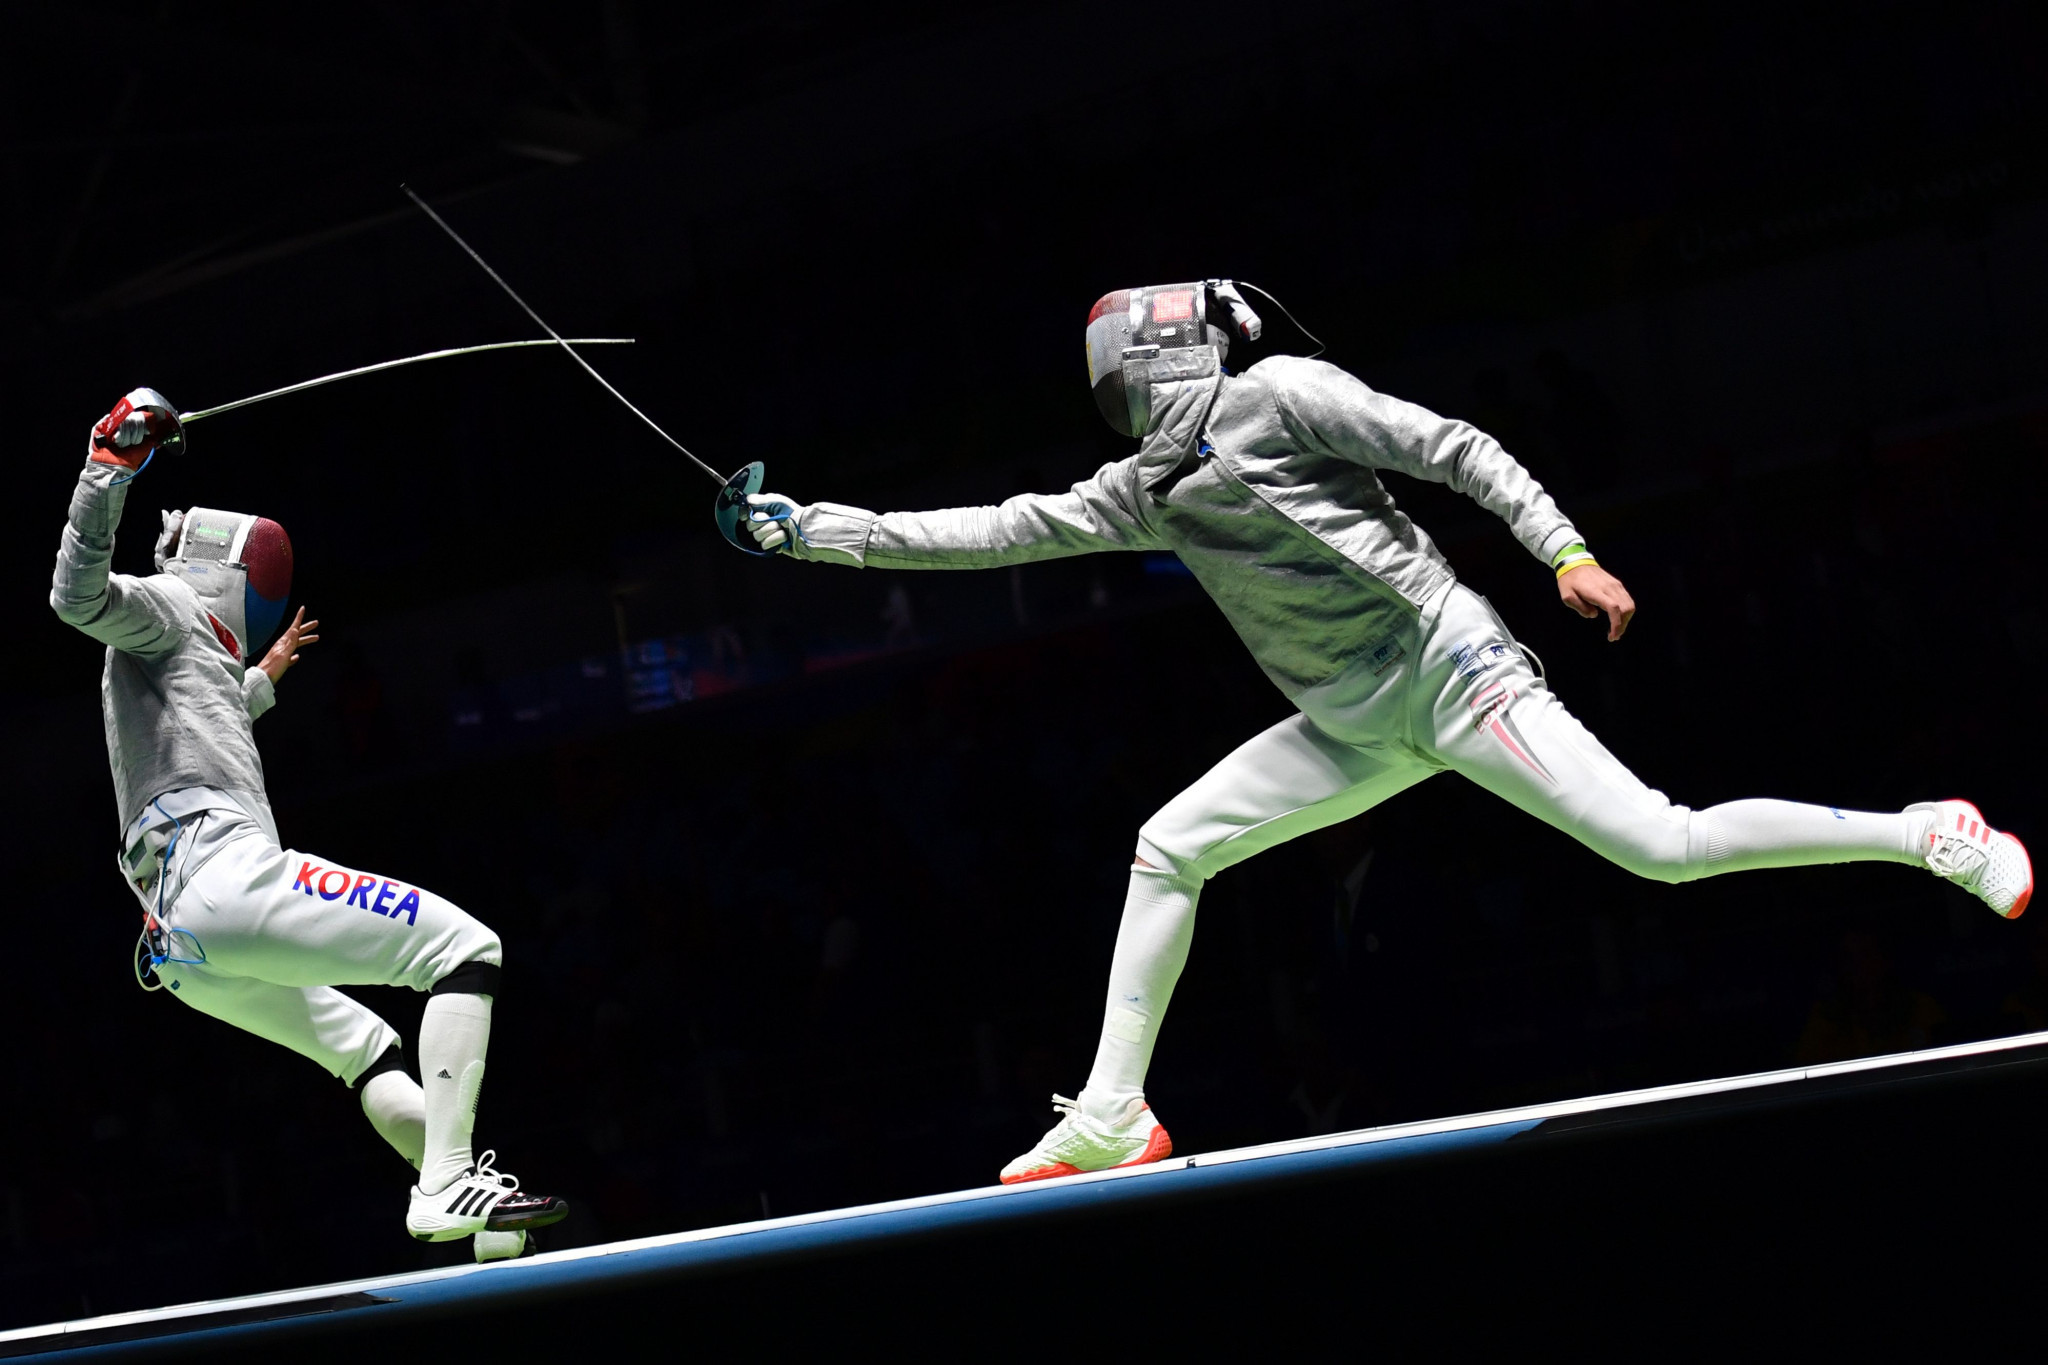 Egypt's Mohamed Amer came out on top in the men's sabre event ©Getty Images